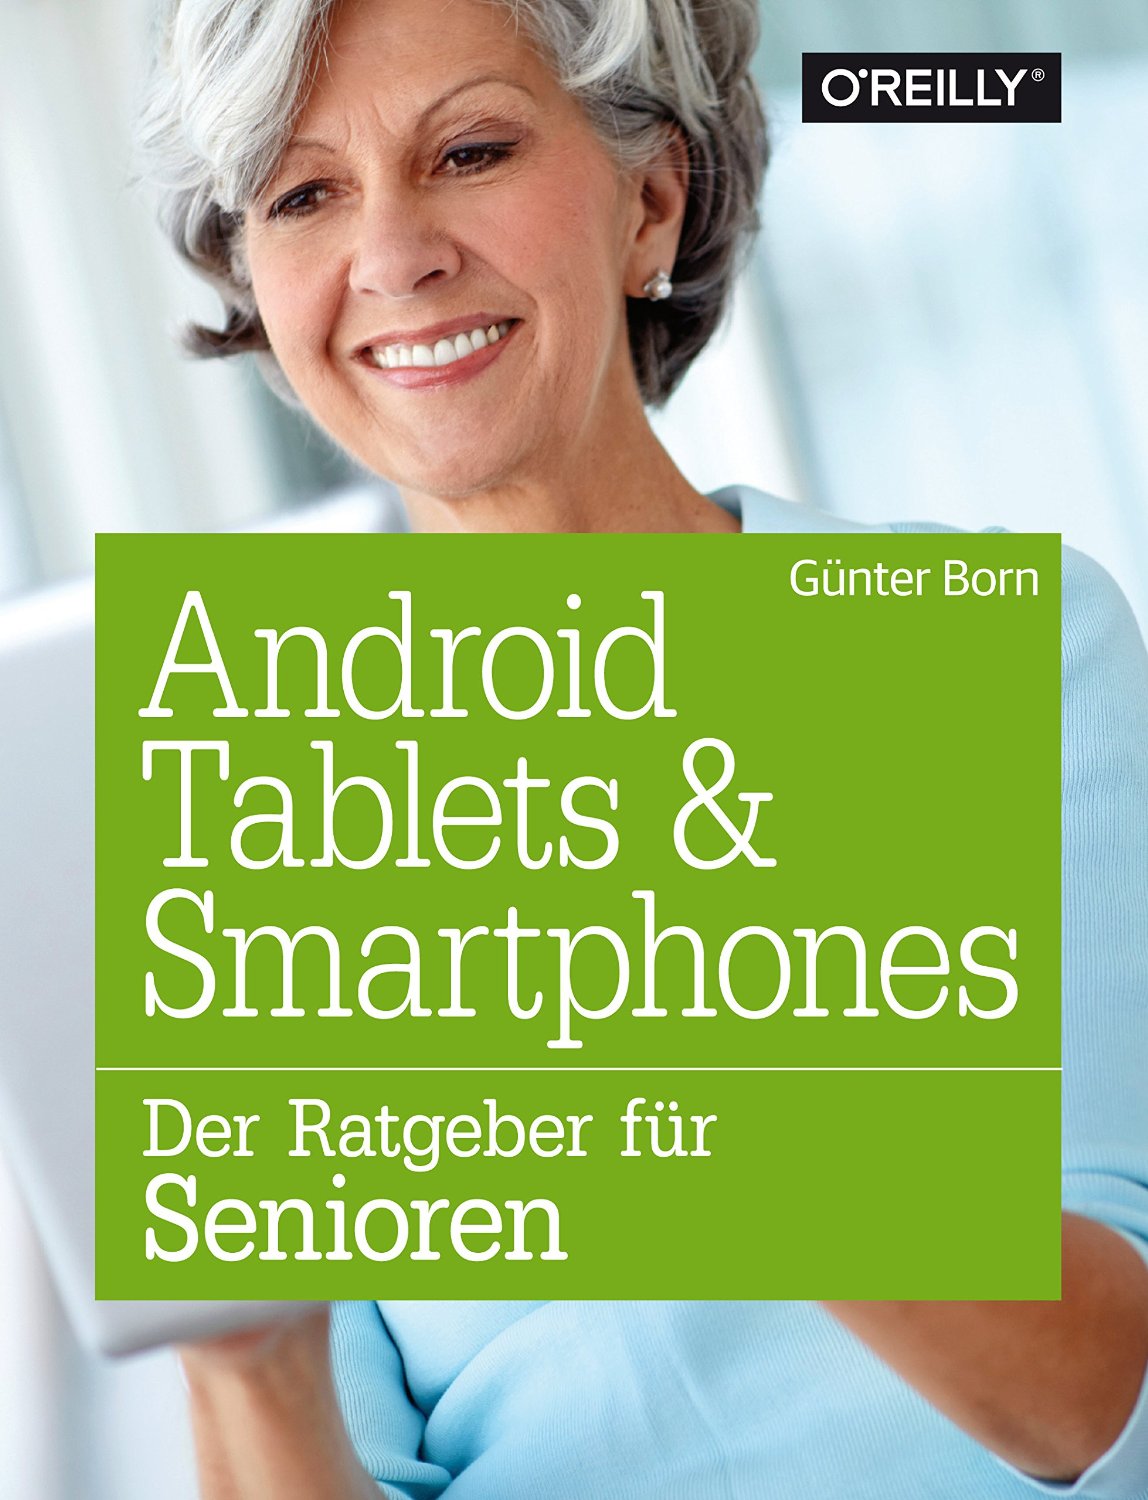 Android Für Tablet Download